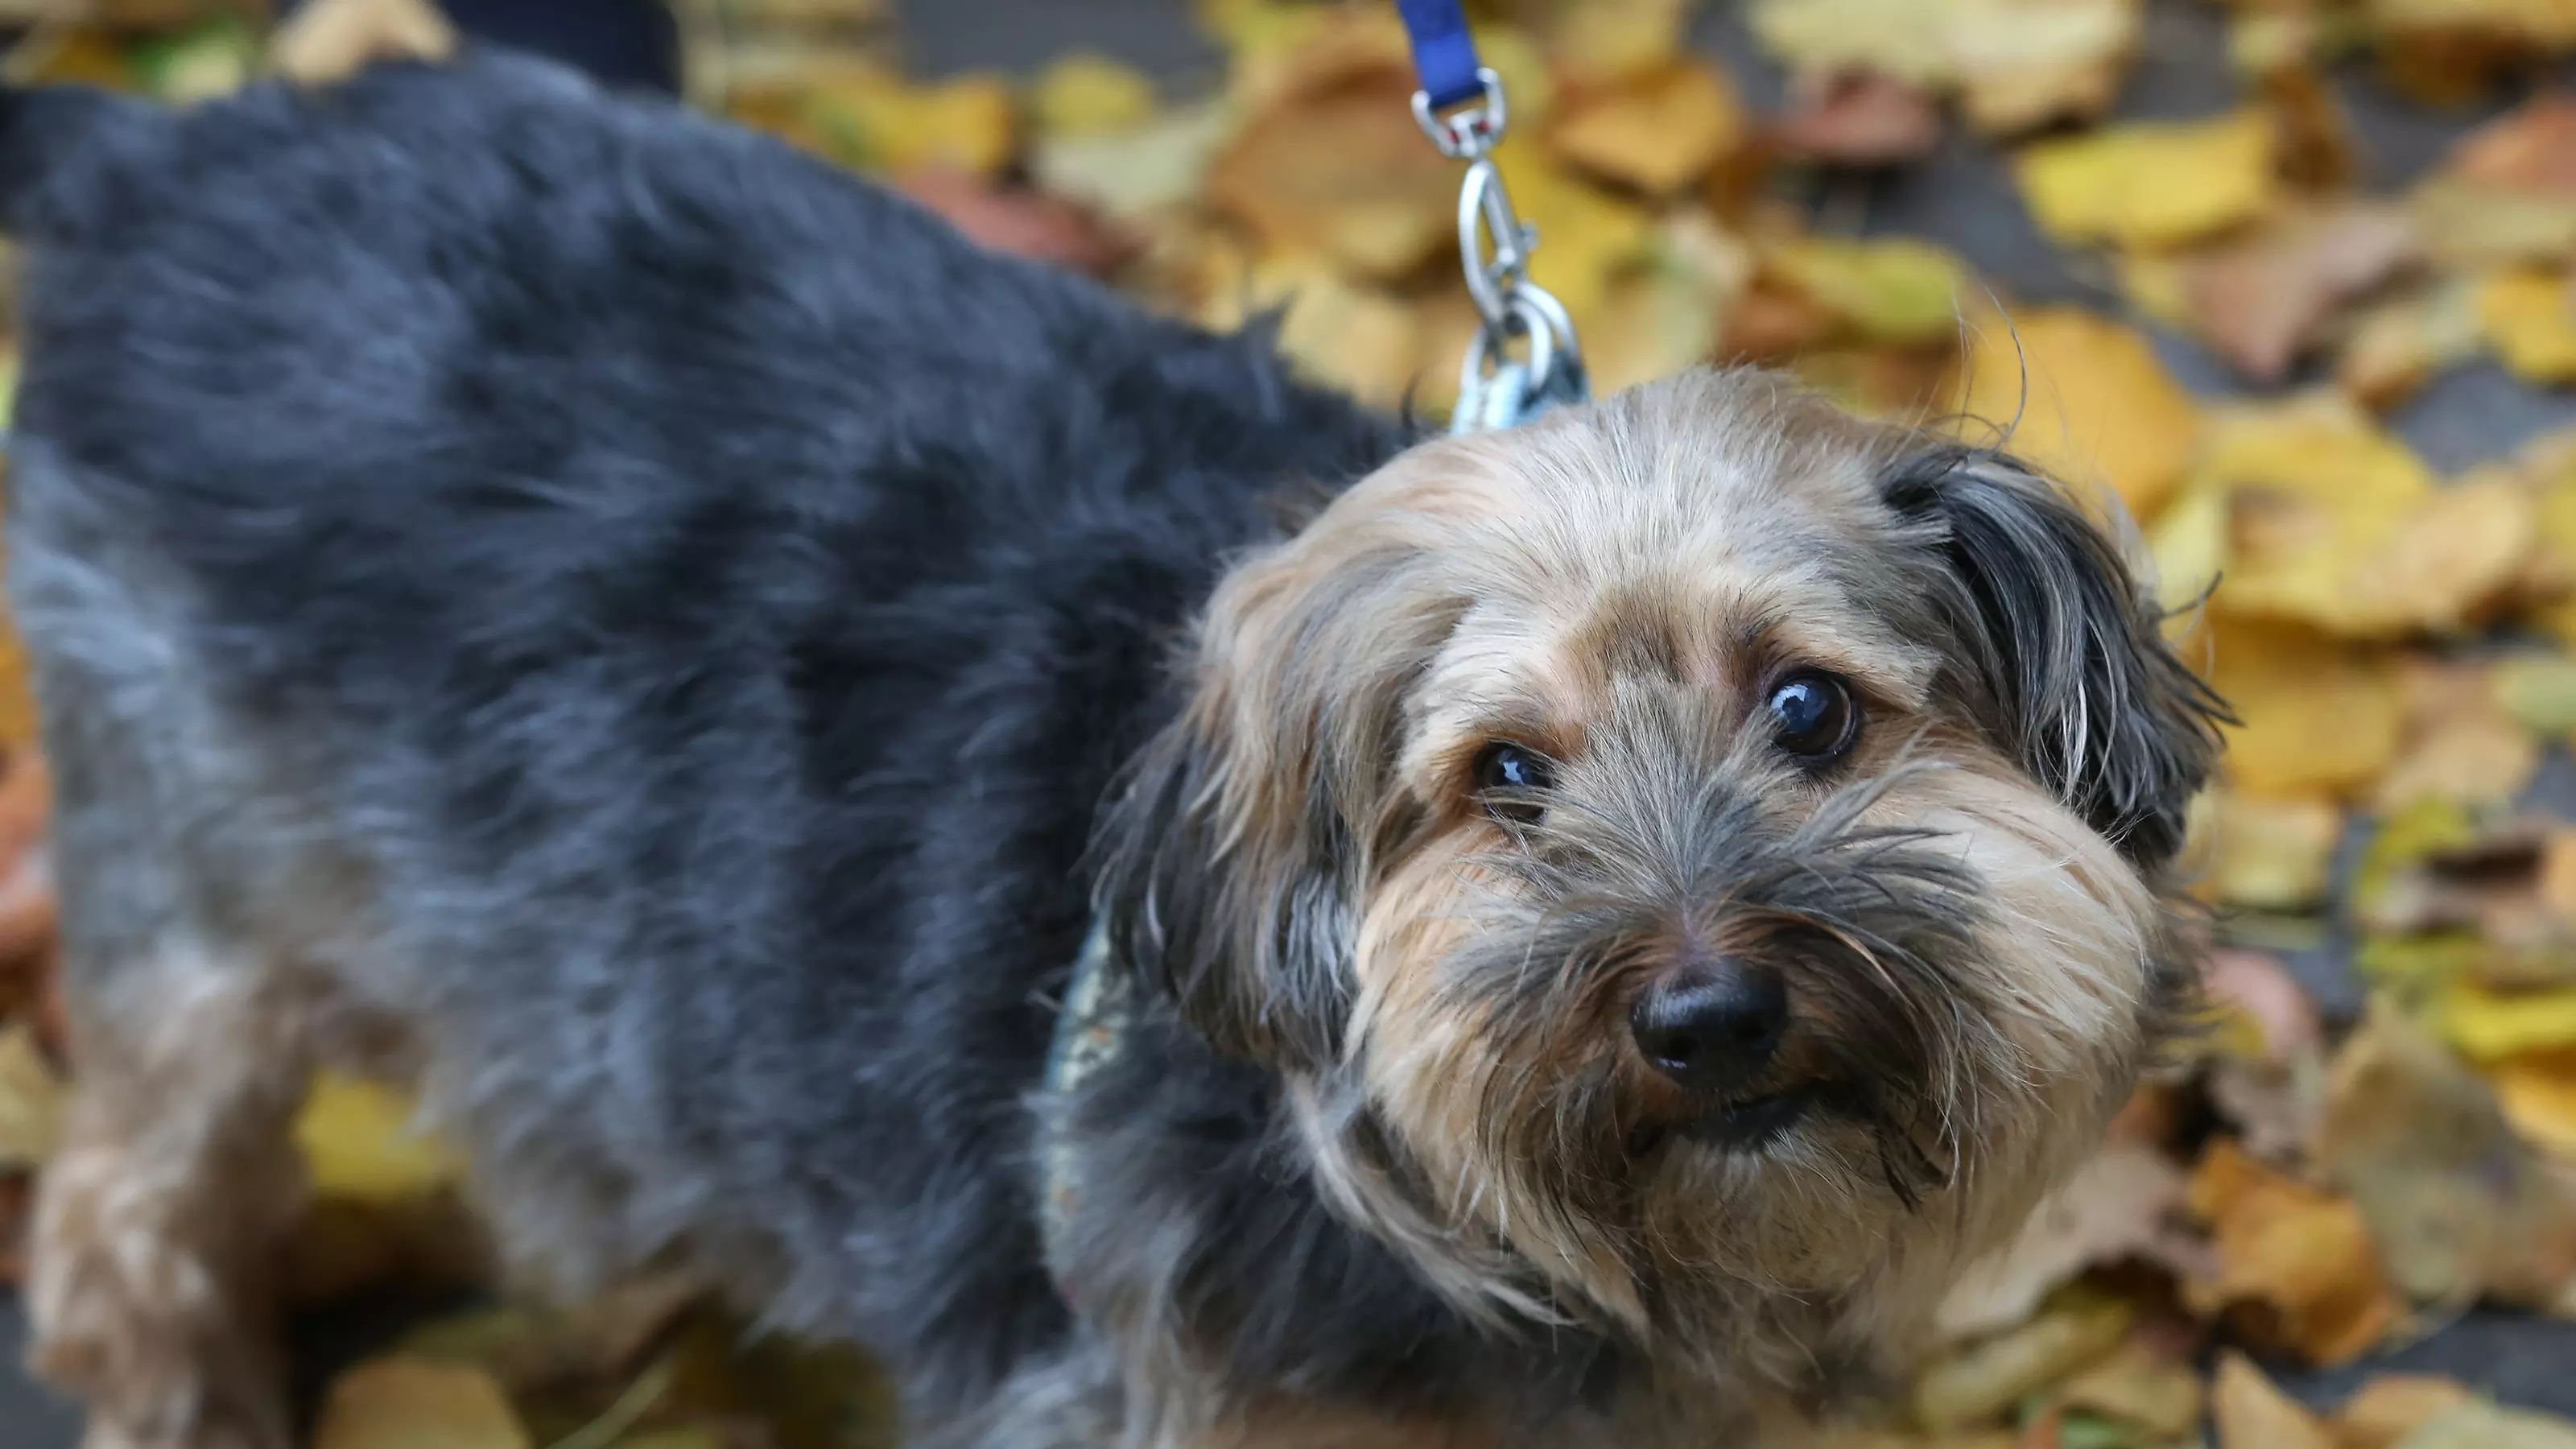 A scruffy crossbreed dog surrounded by yellow and red autumnal leaves looks at the camera